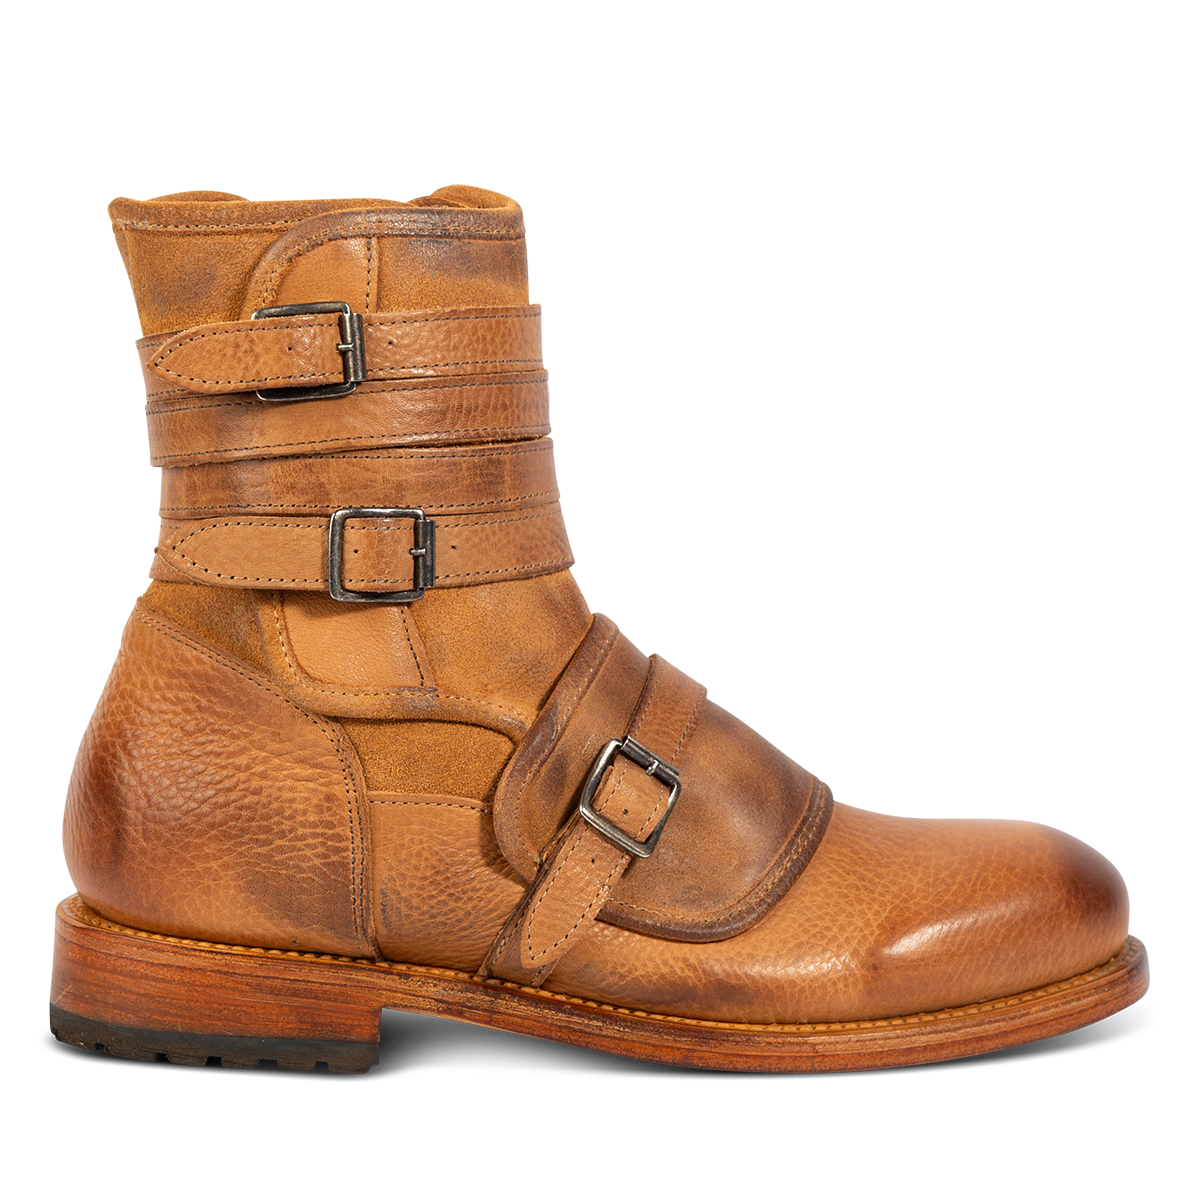 FREEBIRD men's Pantera tan suede and leather boot with multi straps and rubber tread sole